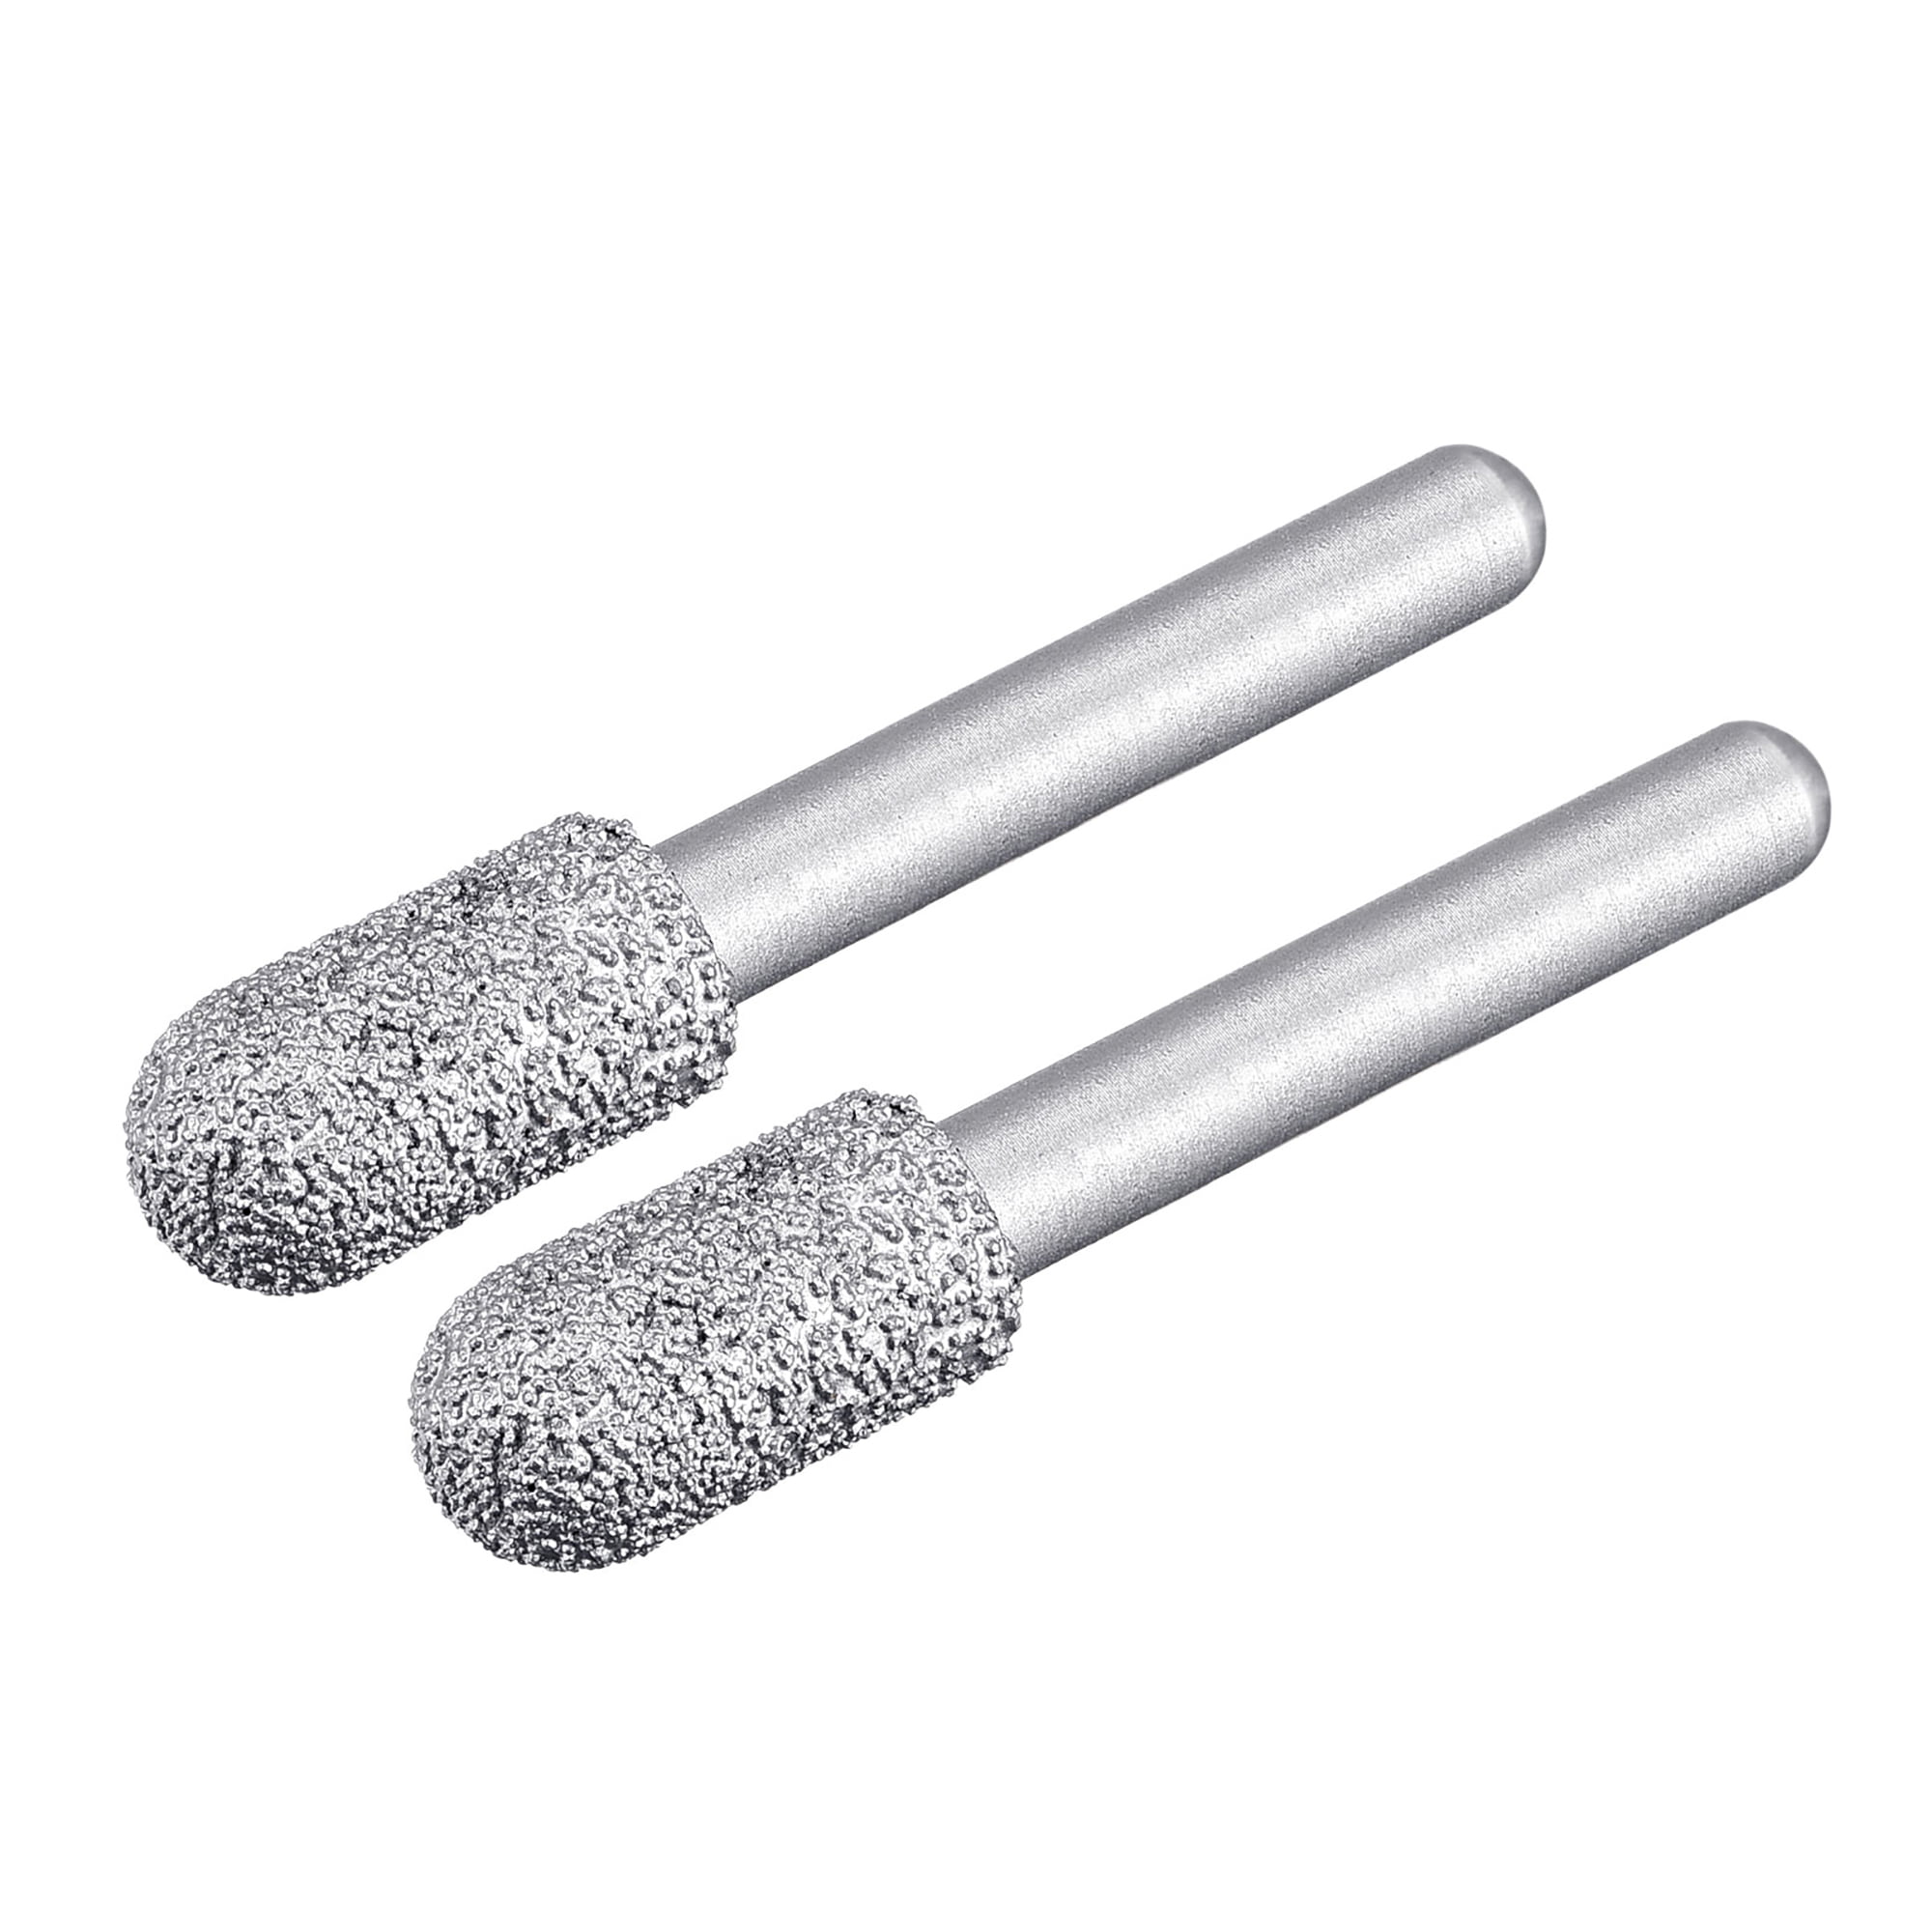 uxcell Diamond Mounted Points 60 Grit 10.5mm Brazed Grinder Round Head 6mm Shank Grinding Rotary Bit Marble Stone Carving Tool